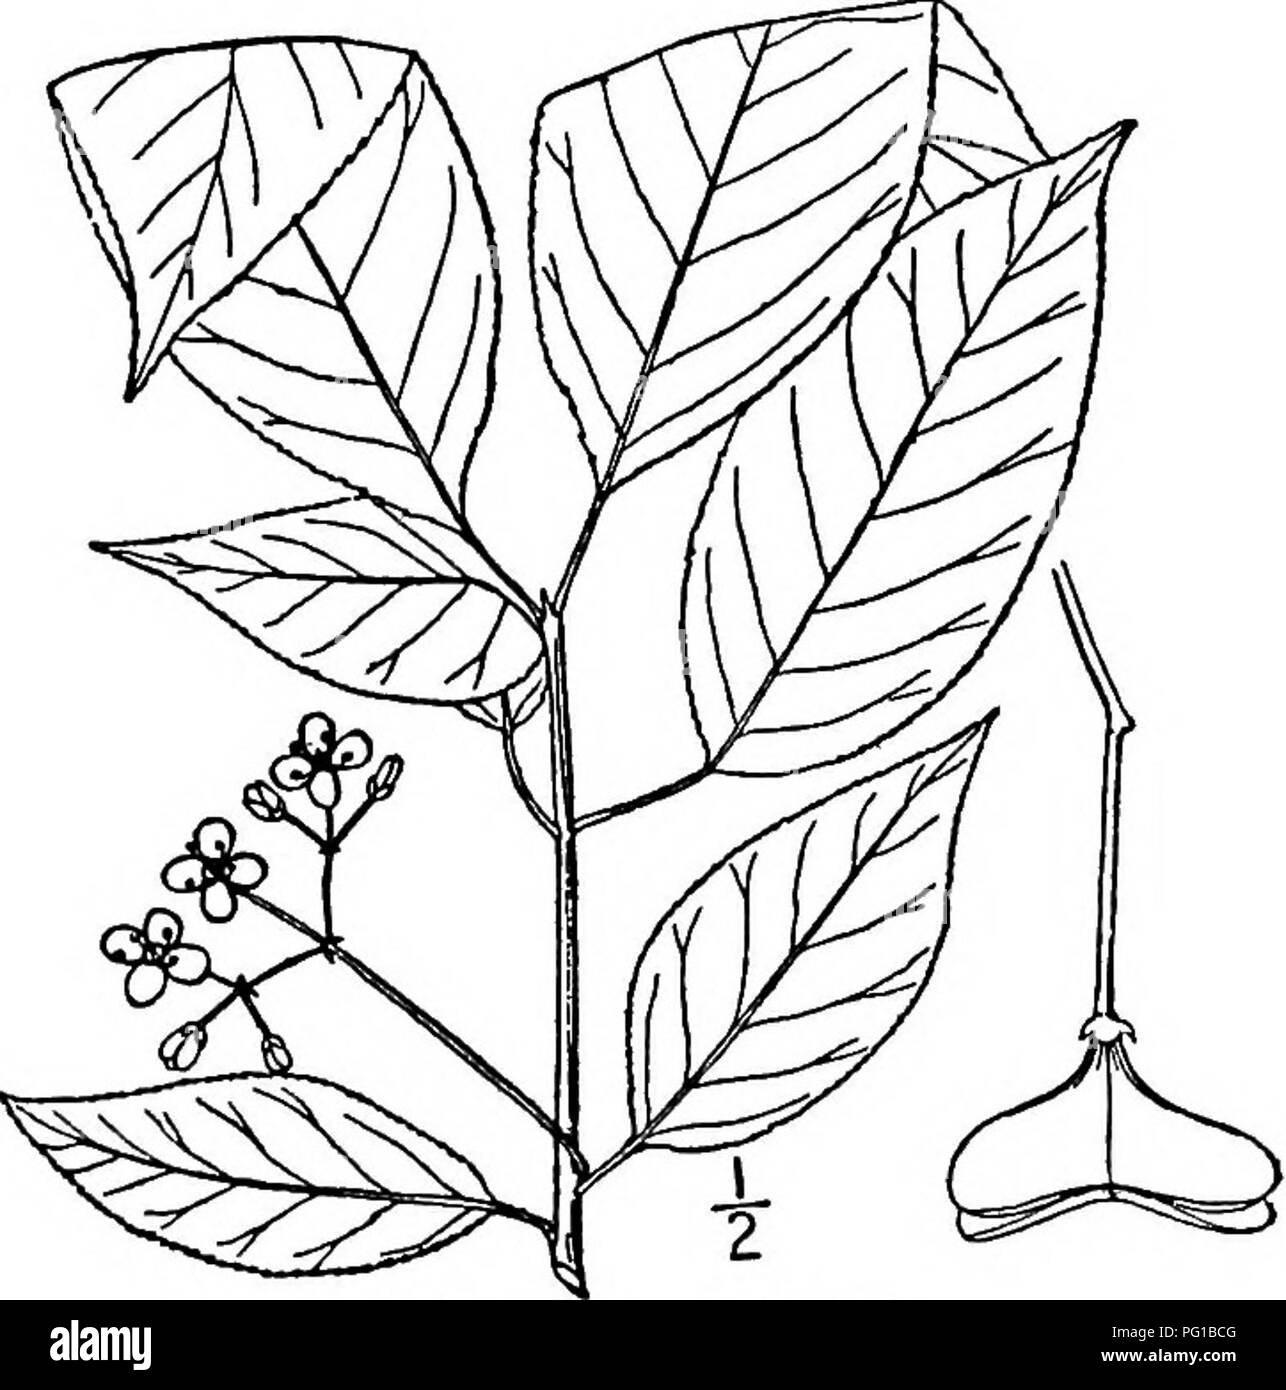 . North American trees : being descriptions and illustrations of the trees growing independently of cultivation in North America, north of Mexico and the West Indies . Trees. Rhacoma 631 leaves, with very small stipules which fall away early. The rather small flowers are in stalked axillary cymes, and are either perfect or polygamous; the calyx is 4-lobed or 5-Iobed; there are 4 or 5 petals, as many stamens, and the ovary is from 3-celled to 5-celled, usually with 2 ovules in each cavity; the style is short and there are as many stigma-lobes as ovary- cavities. The fruit is a more or less fles Stock Photo